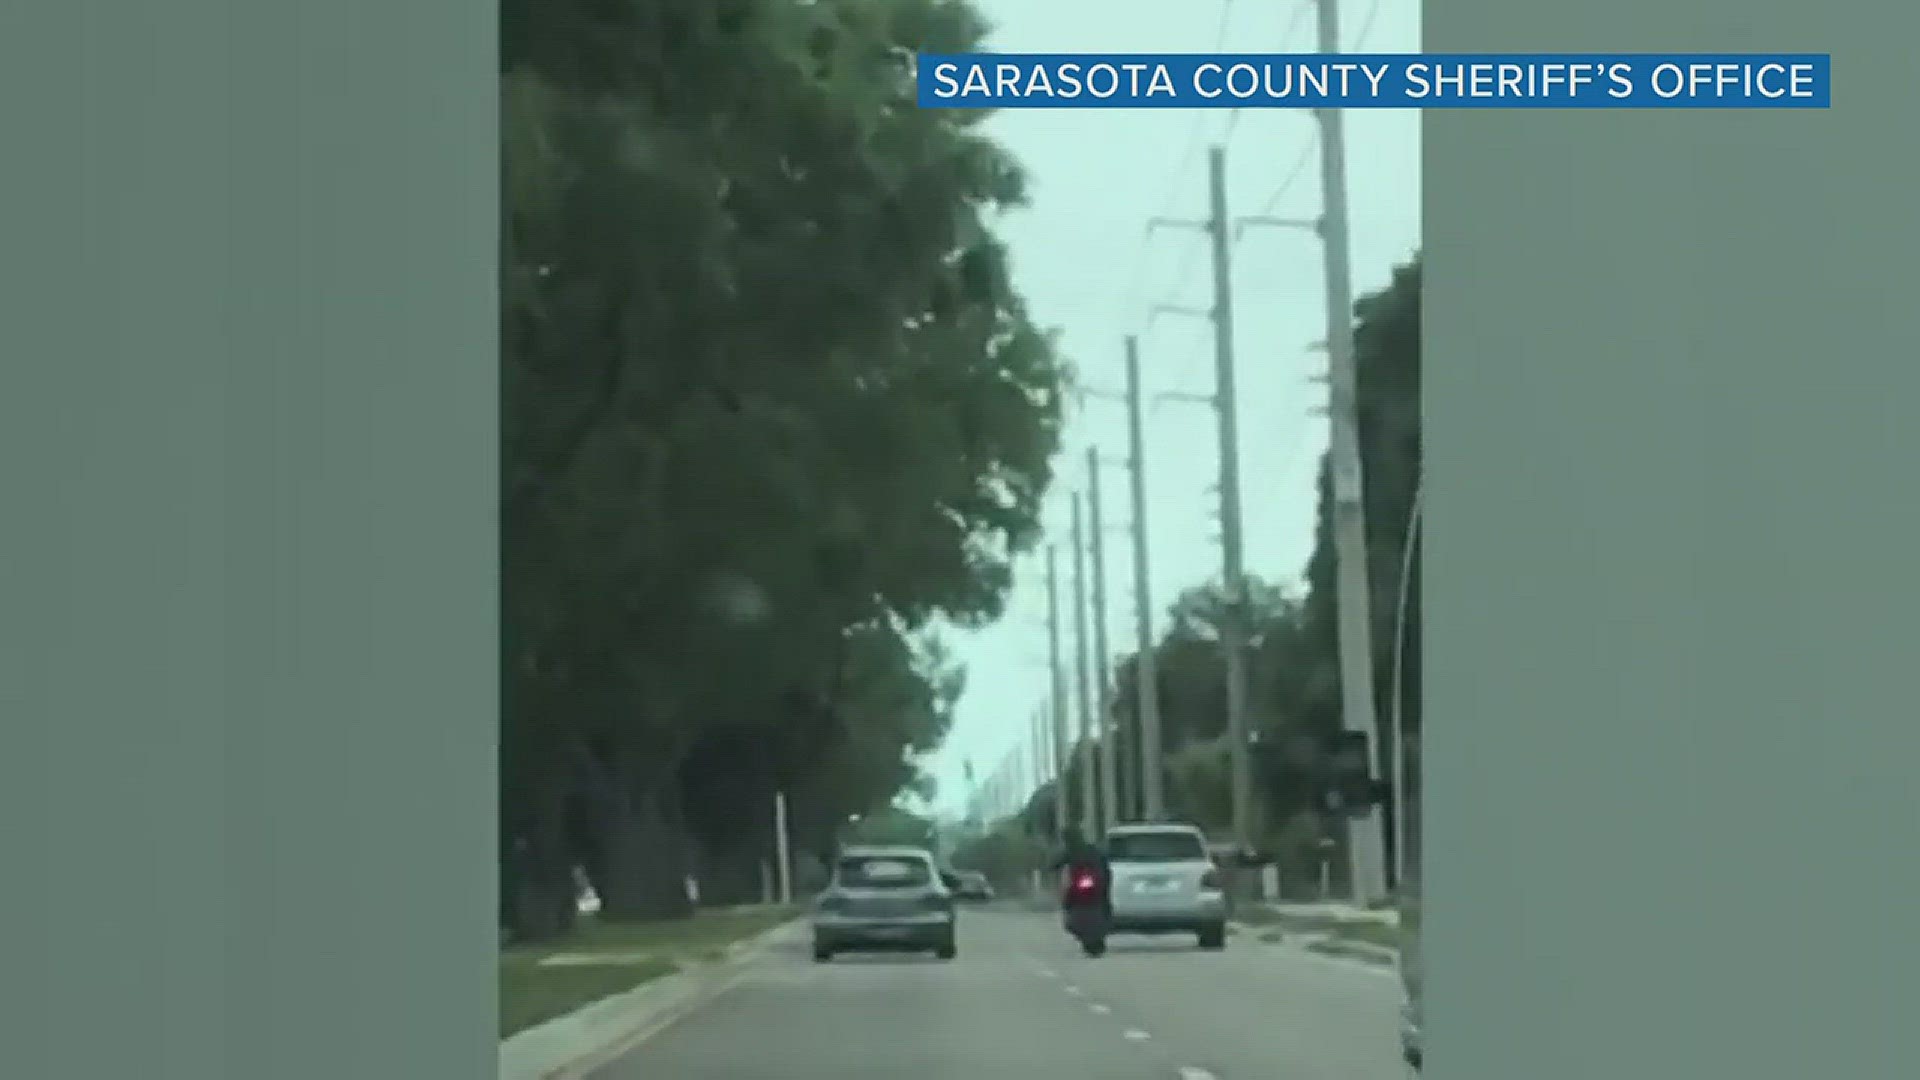 Police are looking to the identify the driver of a car that crashed into a motorcyclist during a road rage incident in Sarasota.